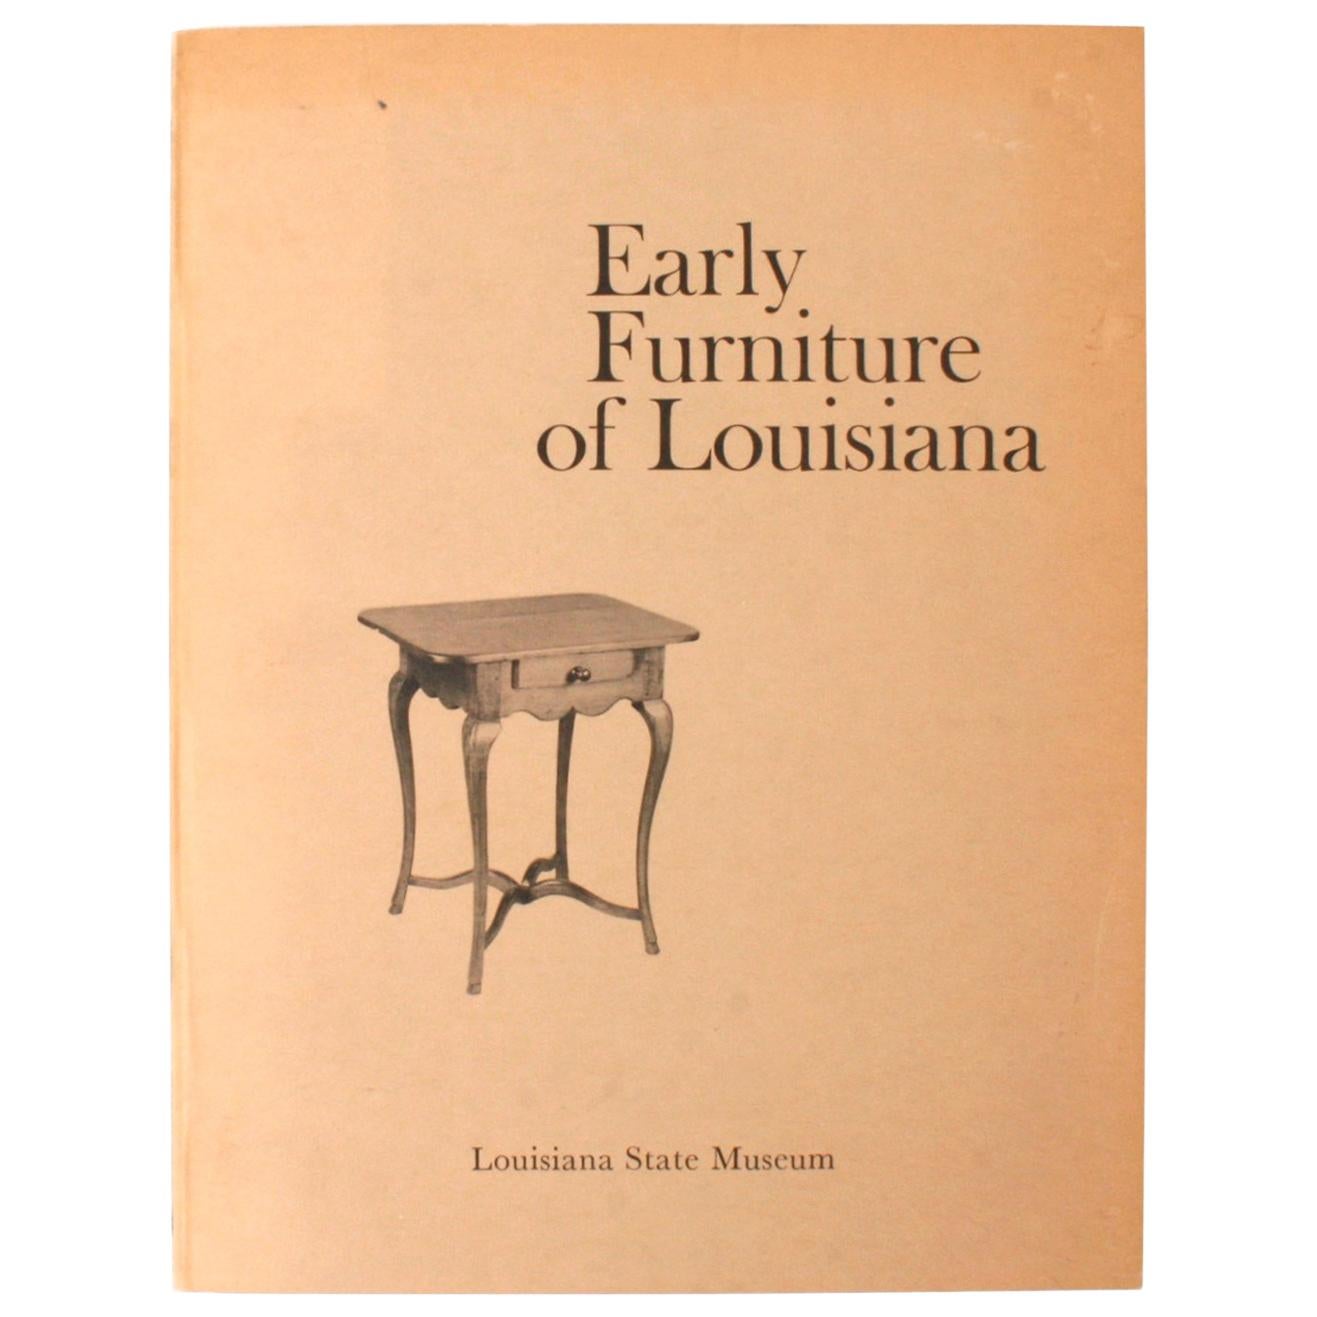 "Early Furniture of Louisiana" Exhibition Catalogue from Louisiana State Museum